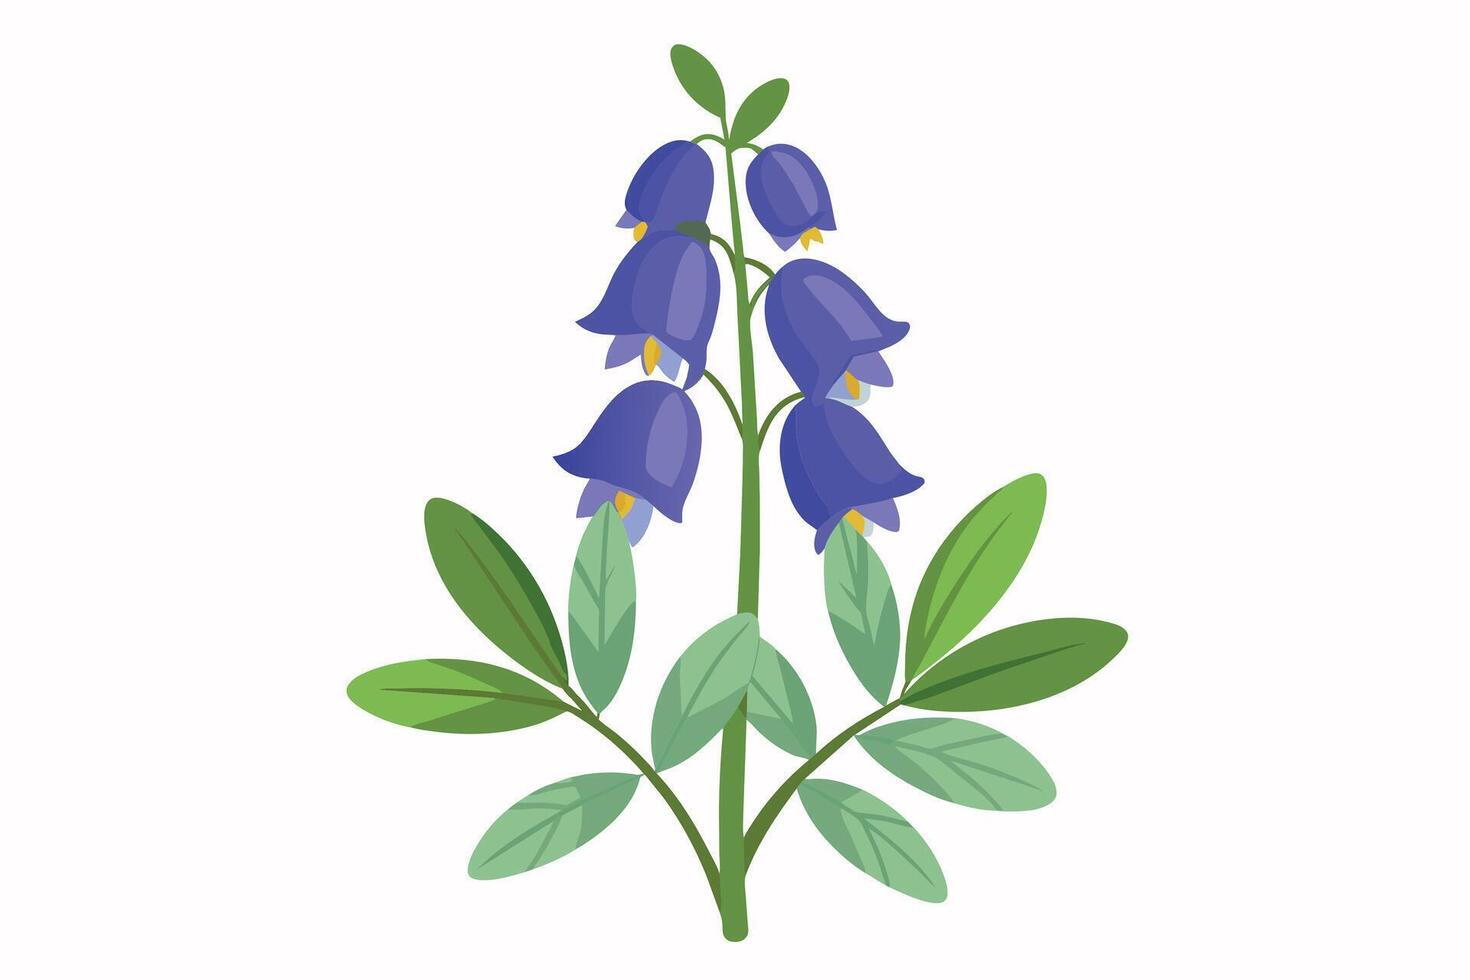 Monkshood Flower Vector Illustration Isolated on a Clean Background